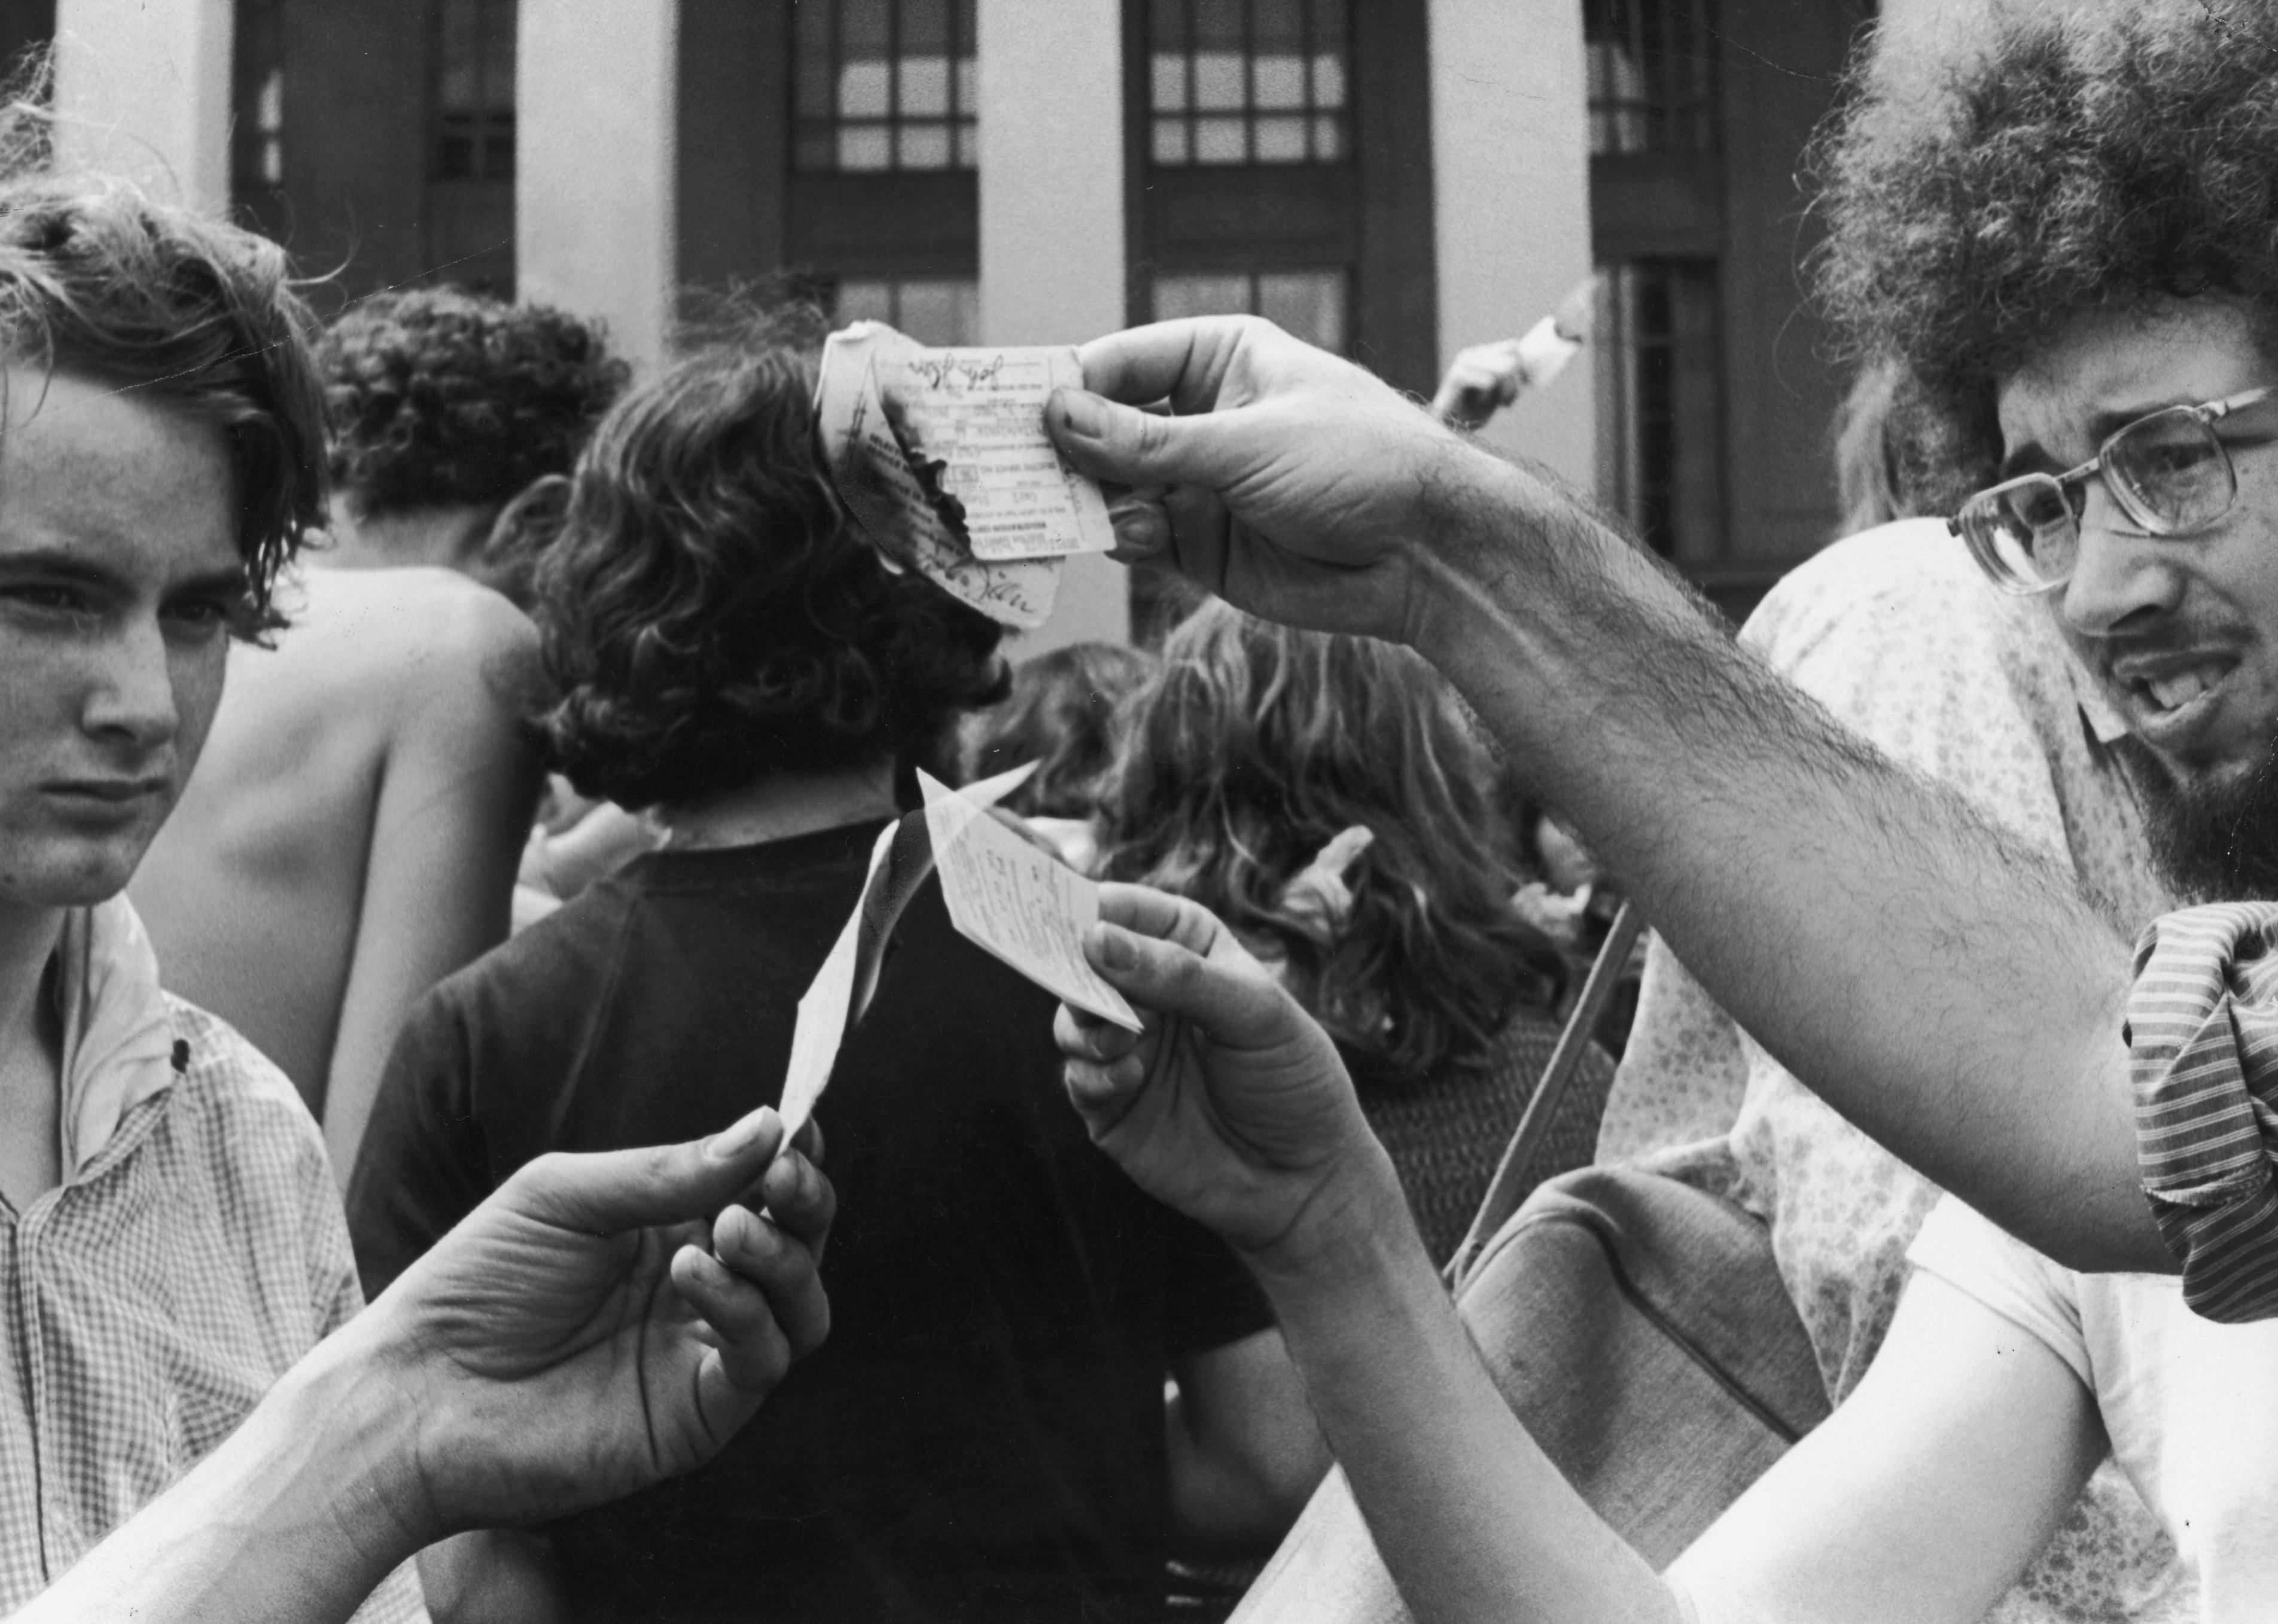 Anti-war demonstrators burn their draft cards on the steps of the Pentagon during the Vietnam War.